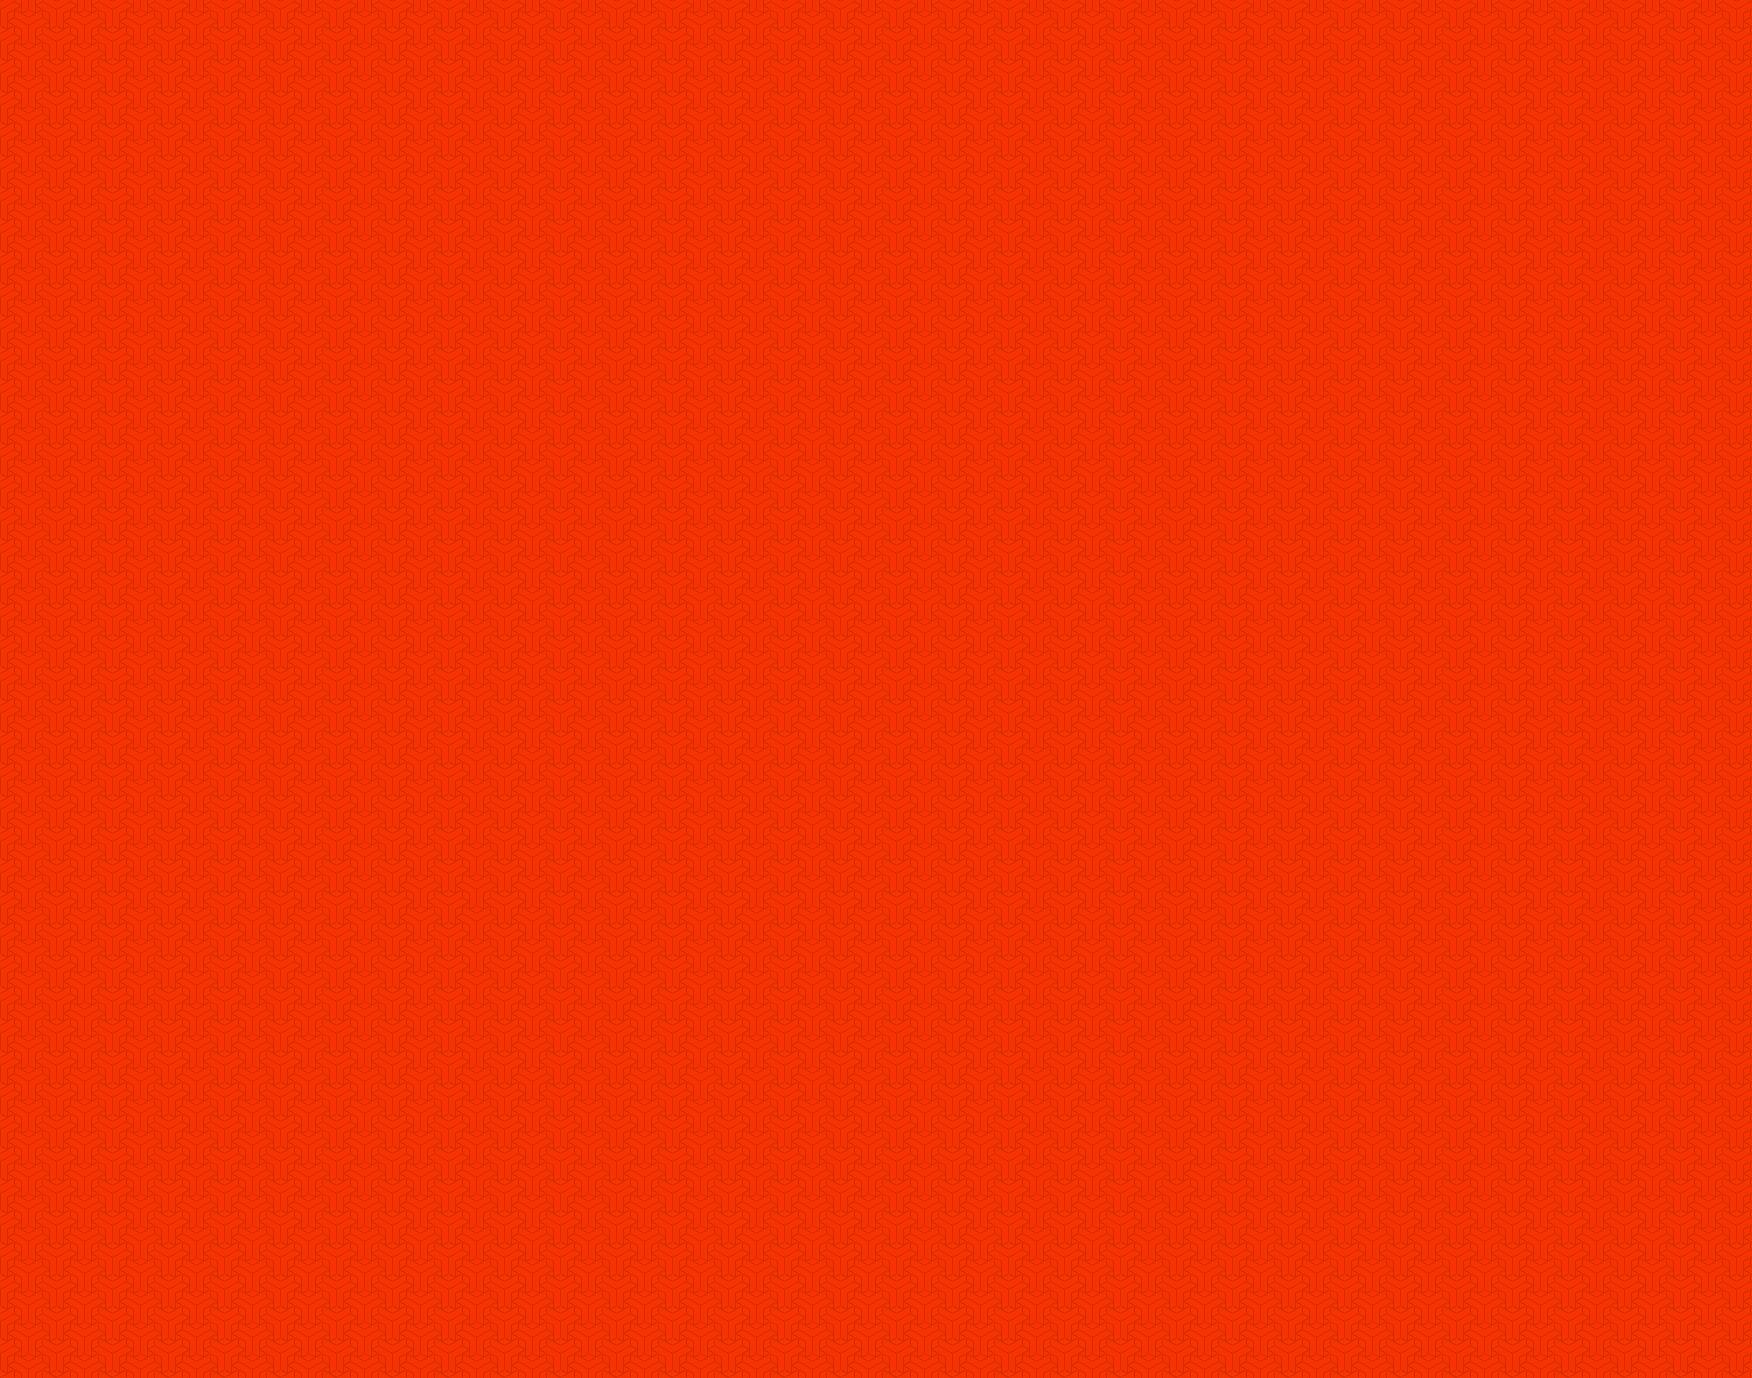 100+] Red Screen Wallpapers | Wallpapers.com